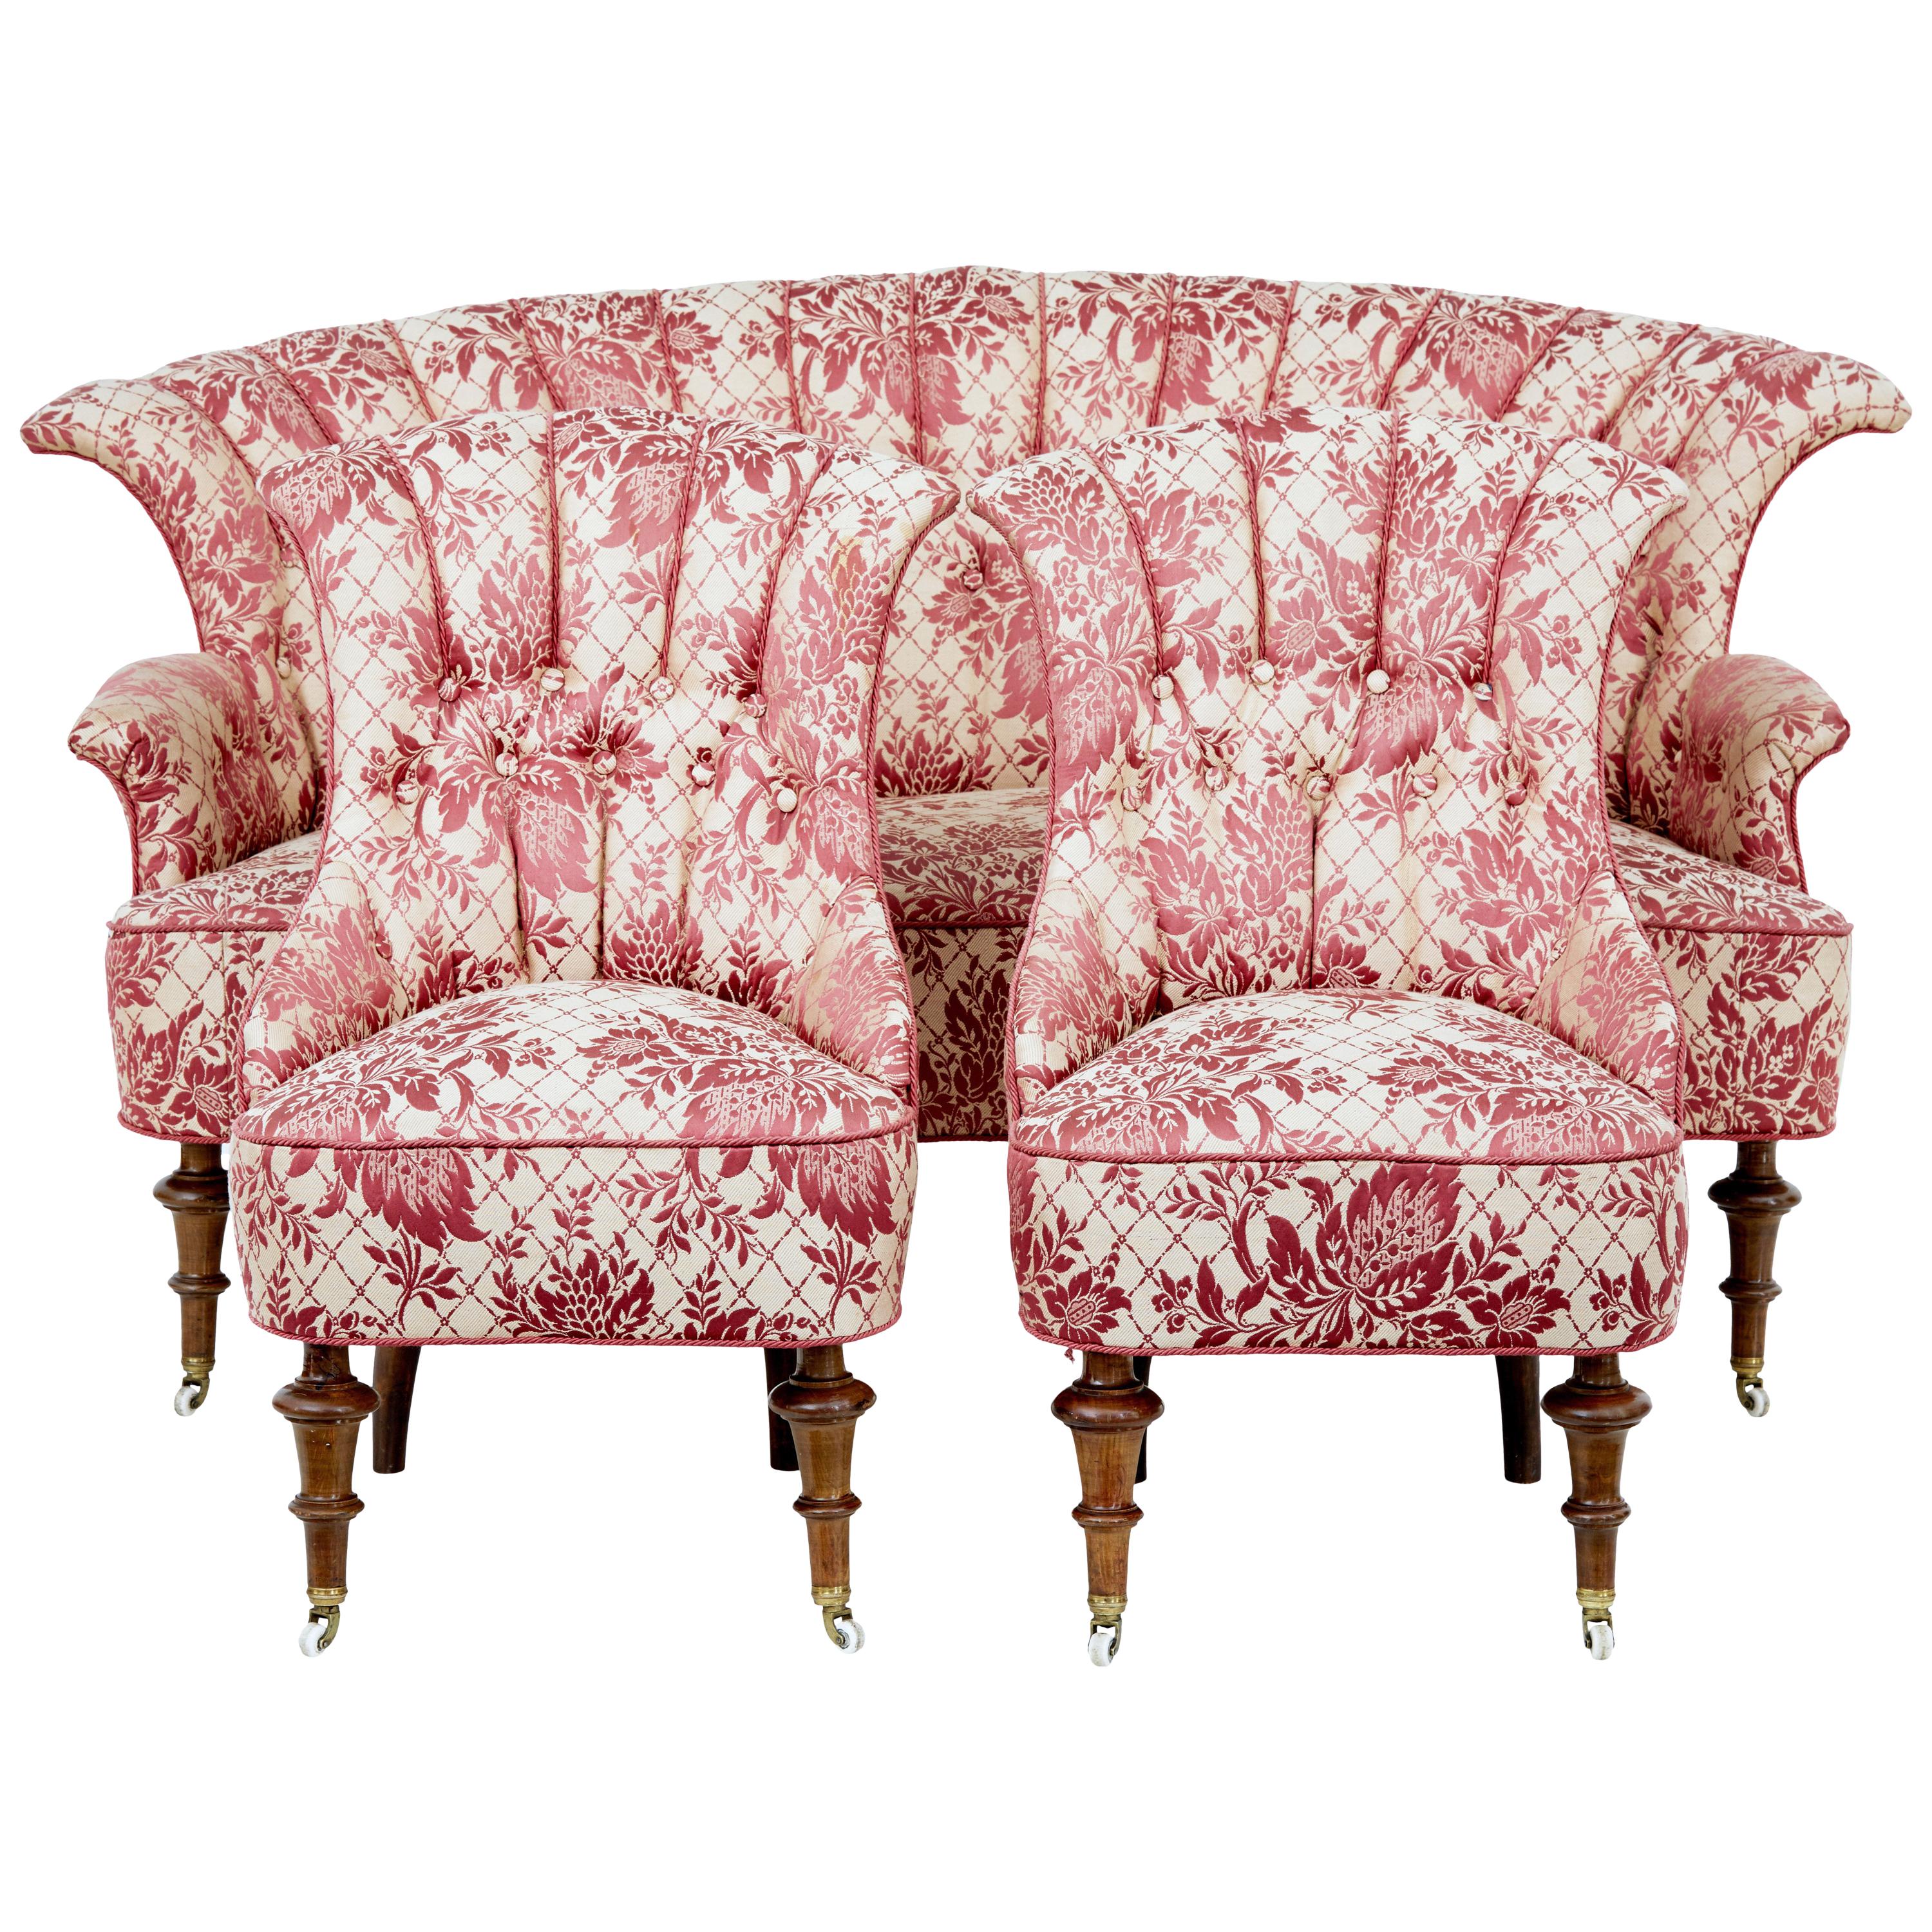 Early 20th Century 3-Piece Upholstered Salon Suite